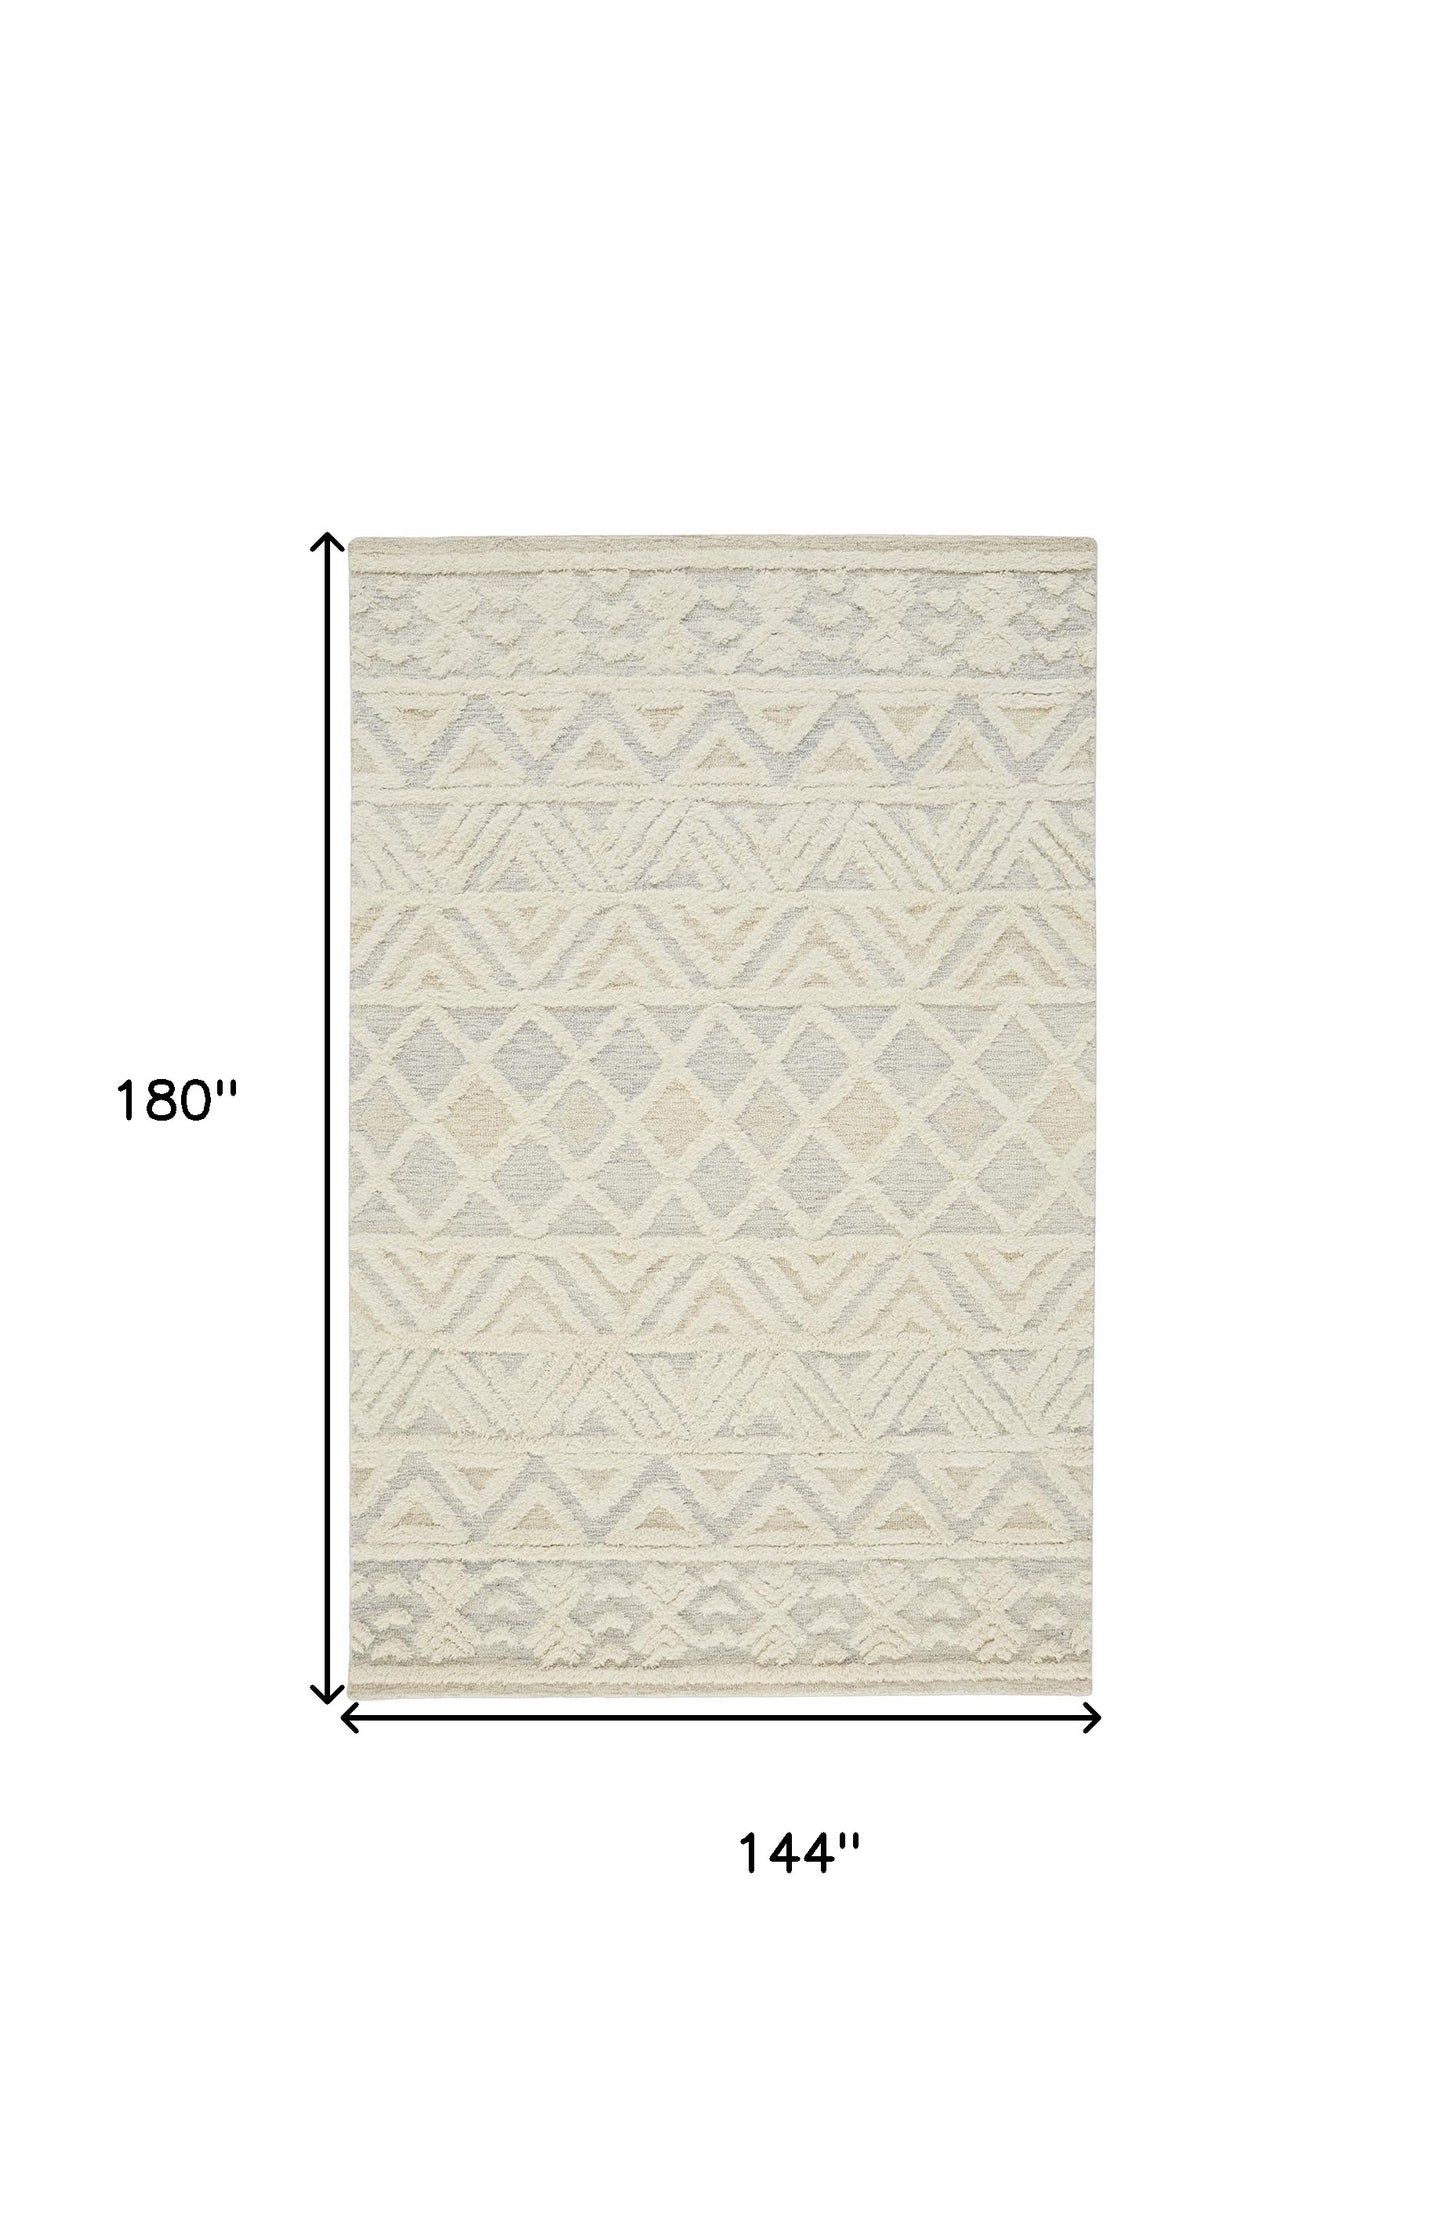 2' X 3' Ivory Blue And Tan Wool Geometric Tufted Handmade Stain Resistant Area Rug